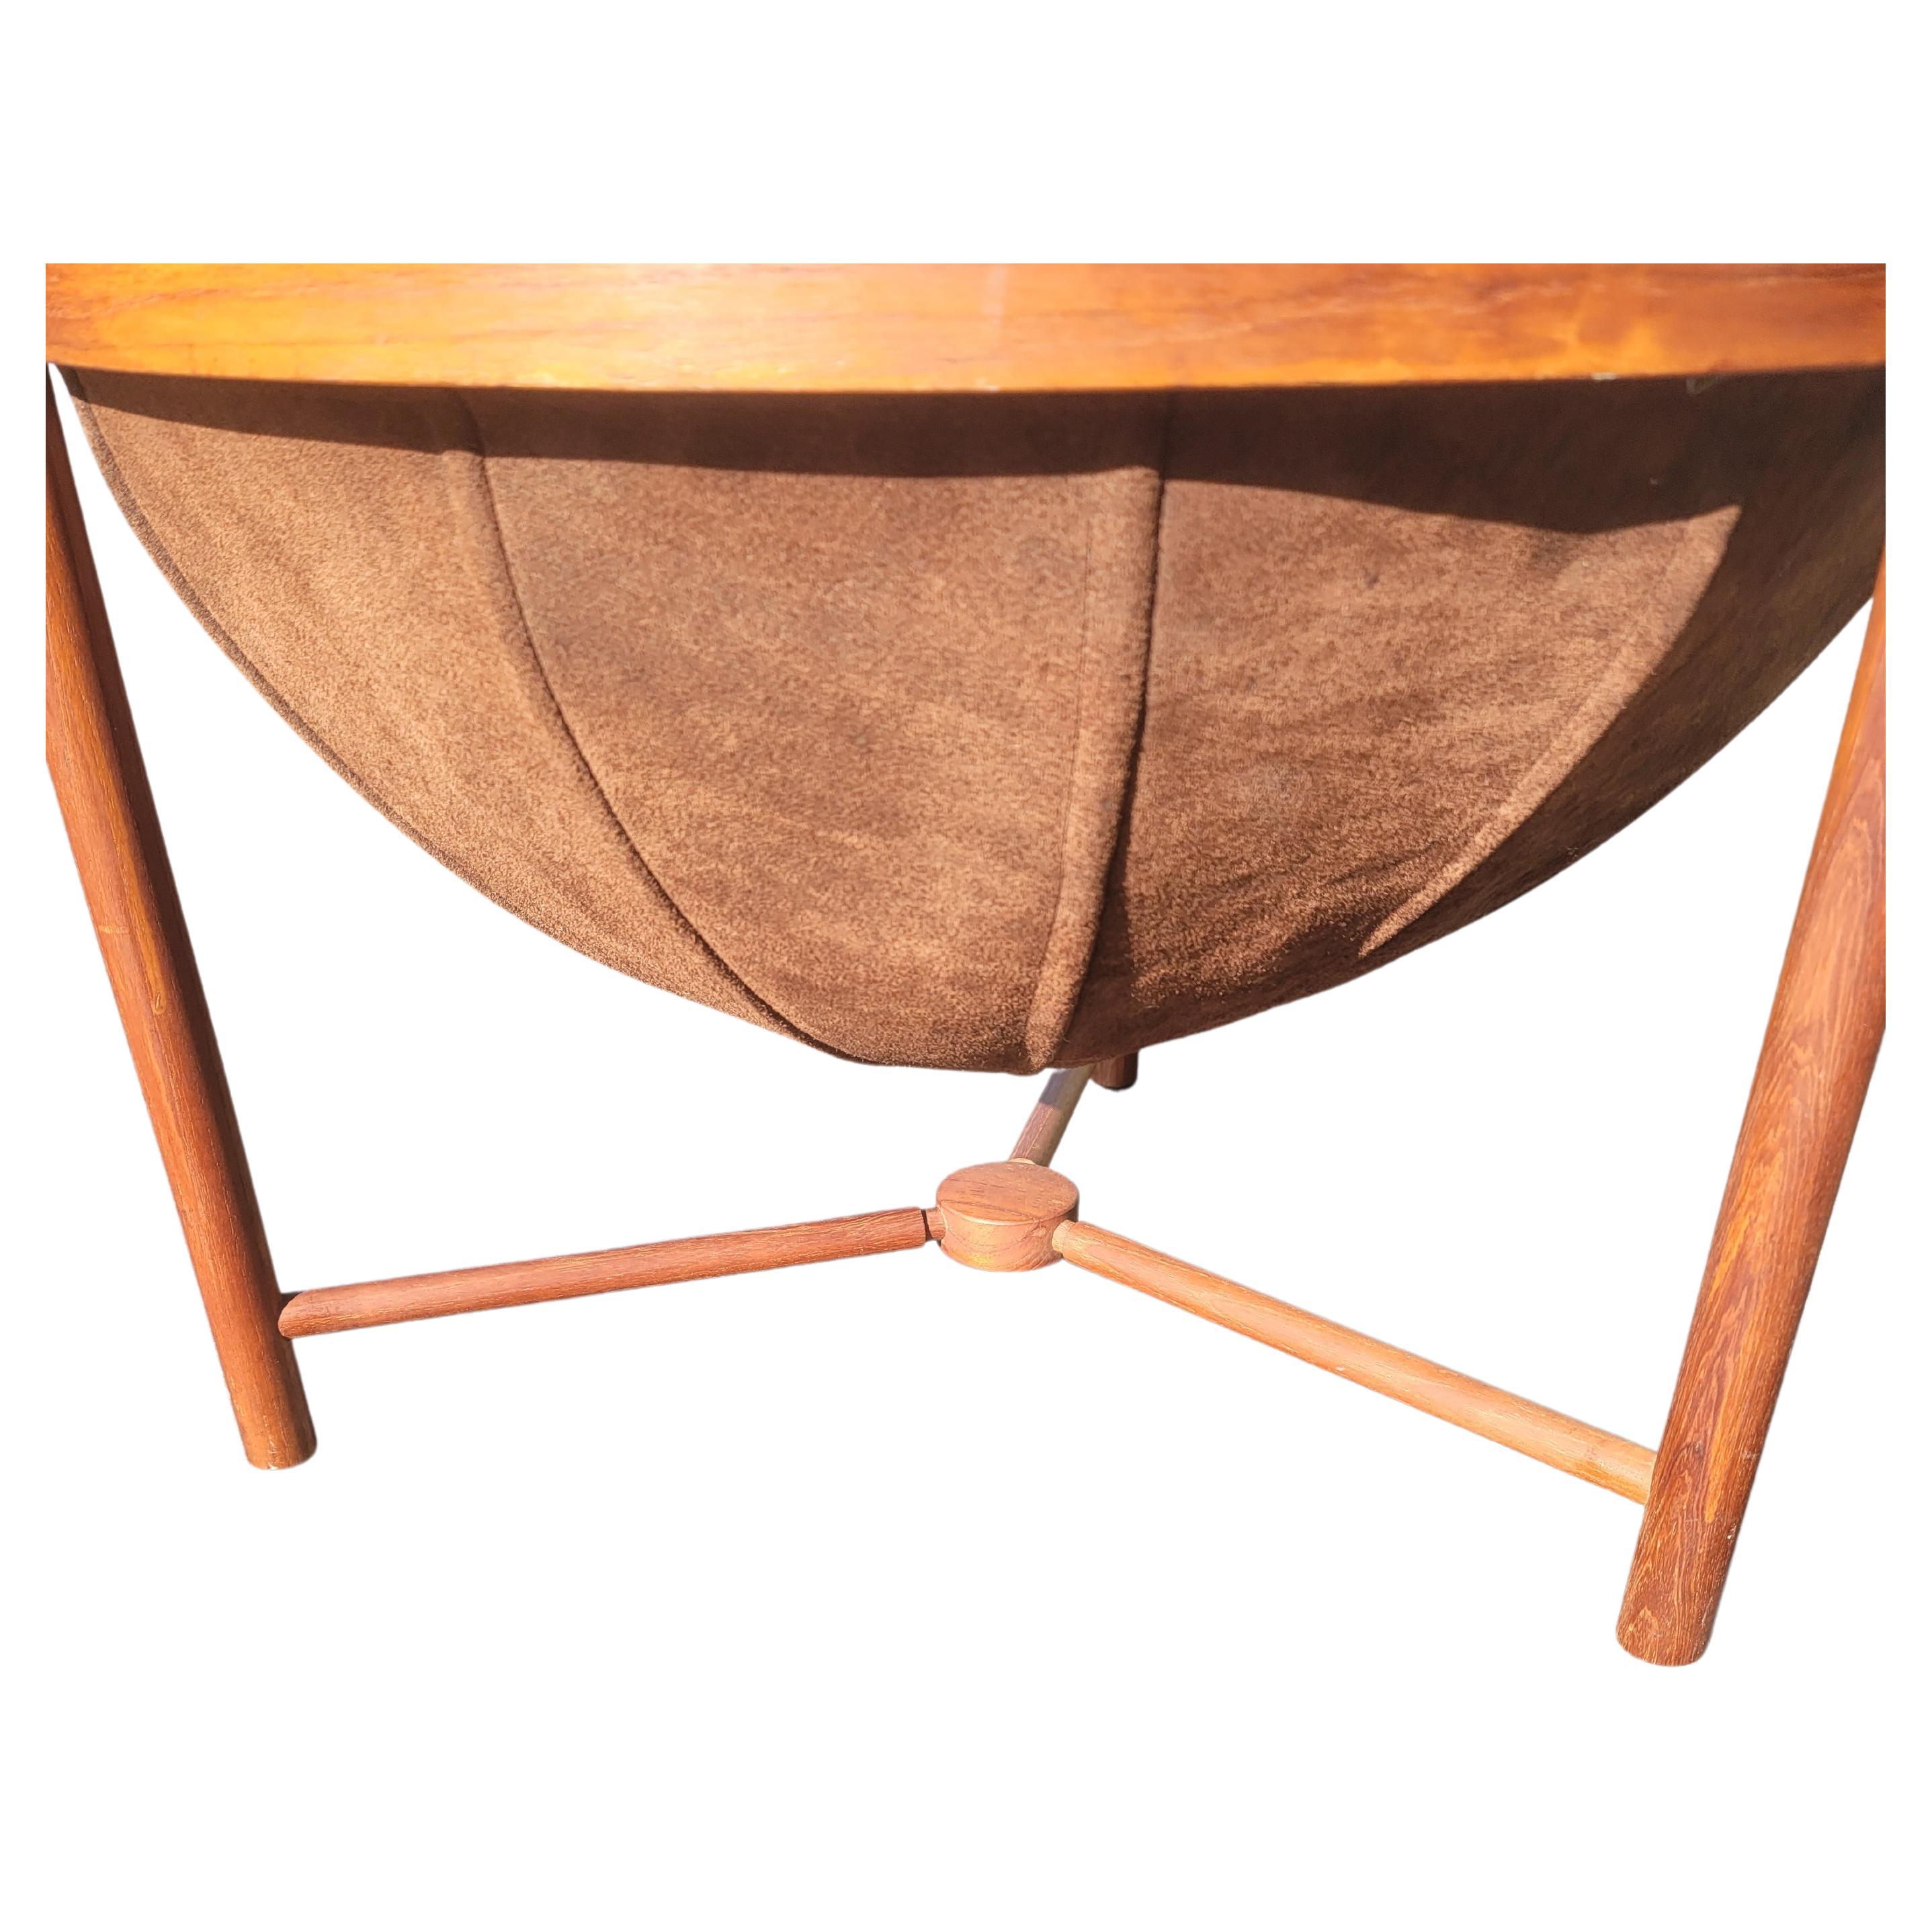 Scandinavian Modern Rostad and Relling for Rasmus Solberg, Norway 1962 Teak & Leather Sewing Table For Sale